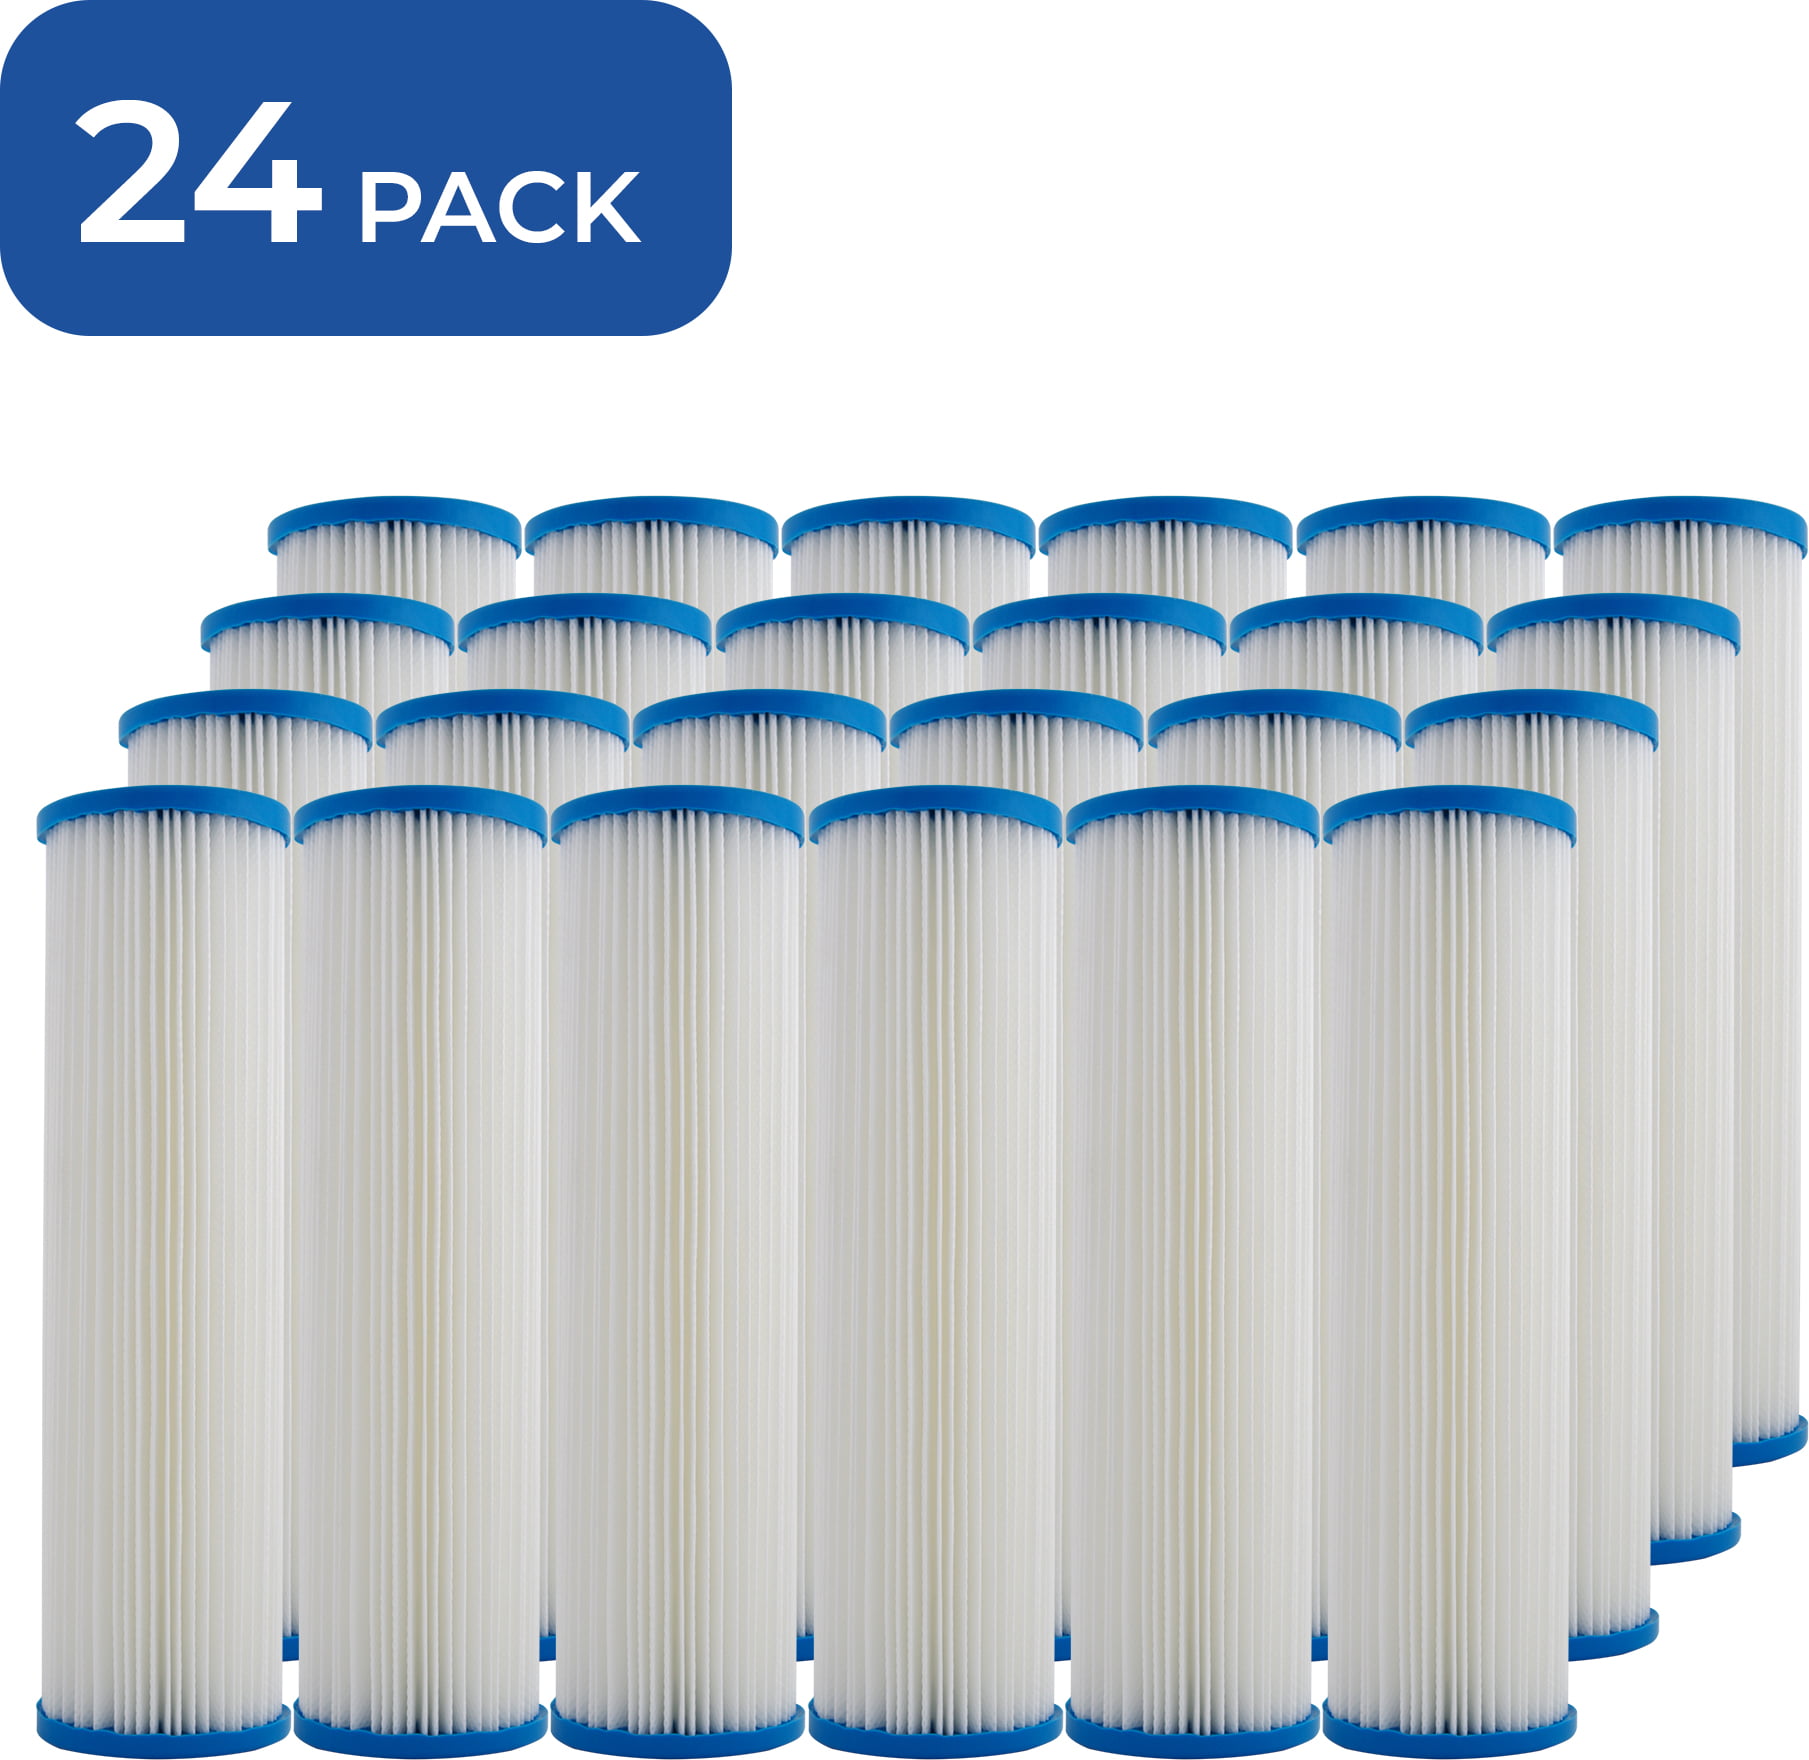 8 Pack 155053-43 10x4.5 Water Filters SpiroPure Replacement for Pentek R50-BB